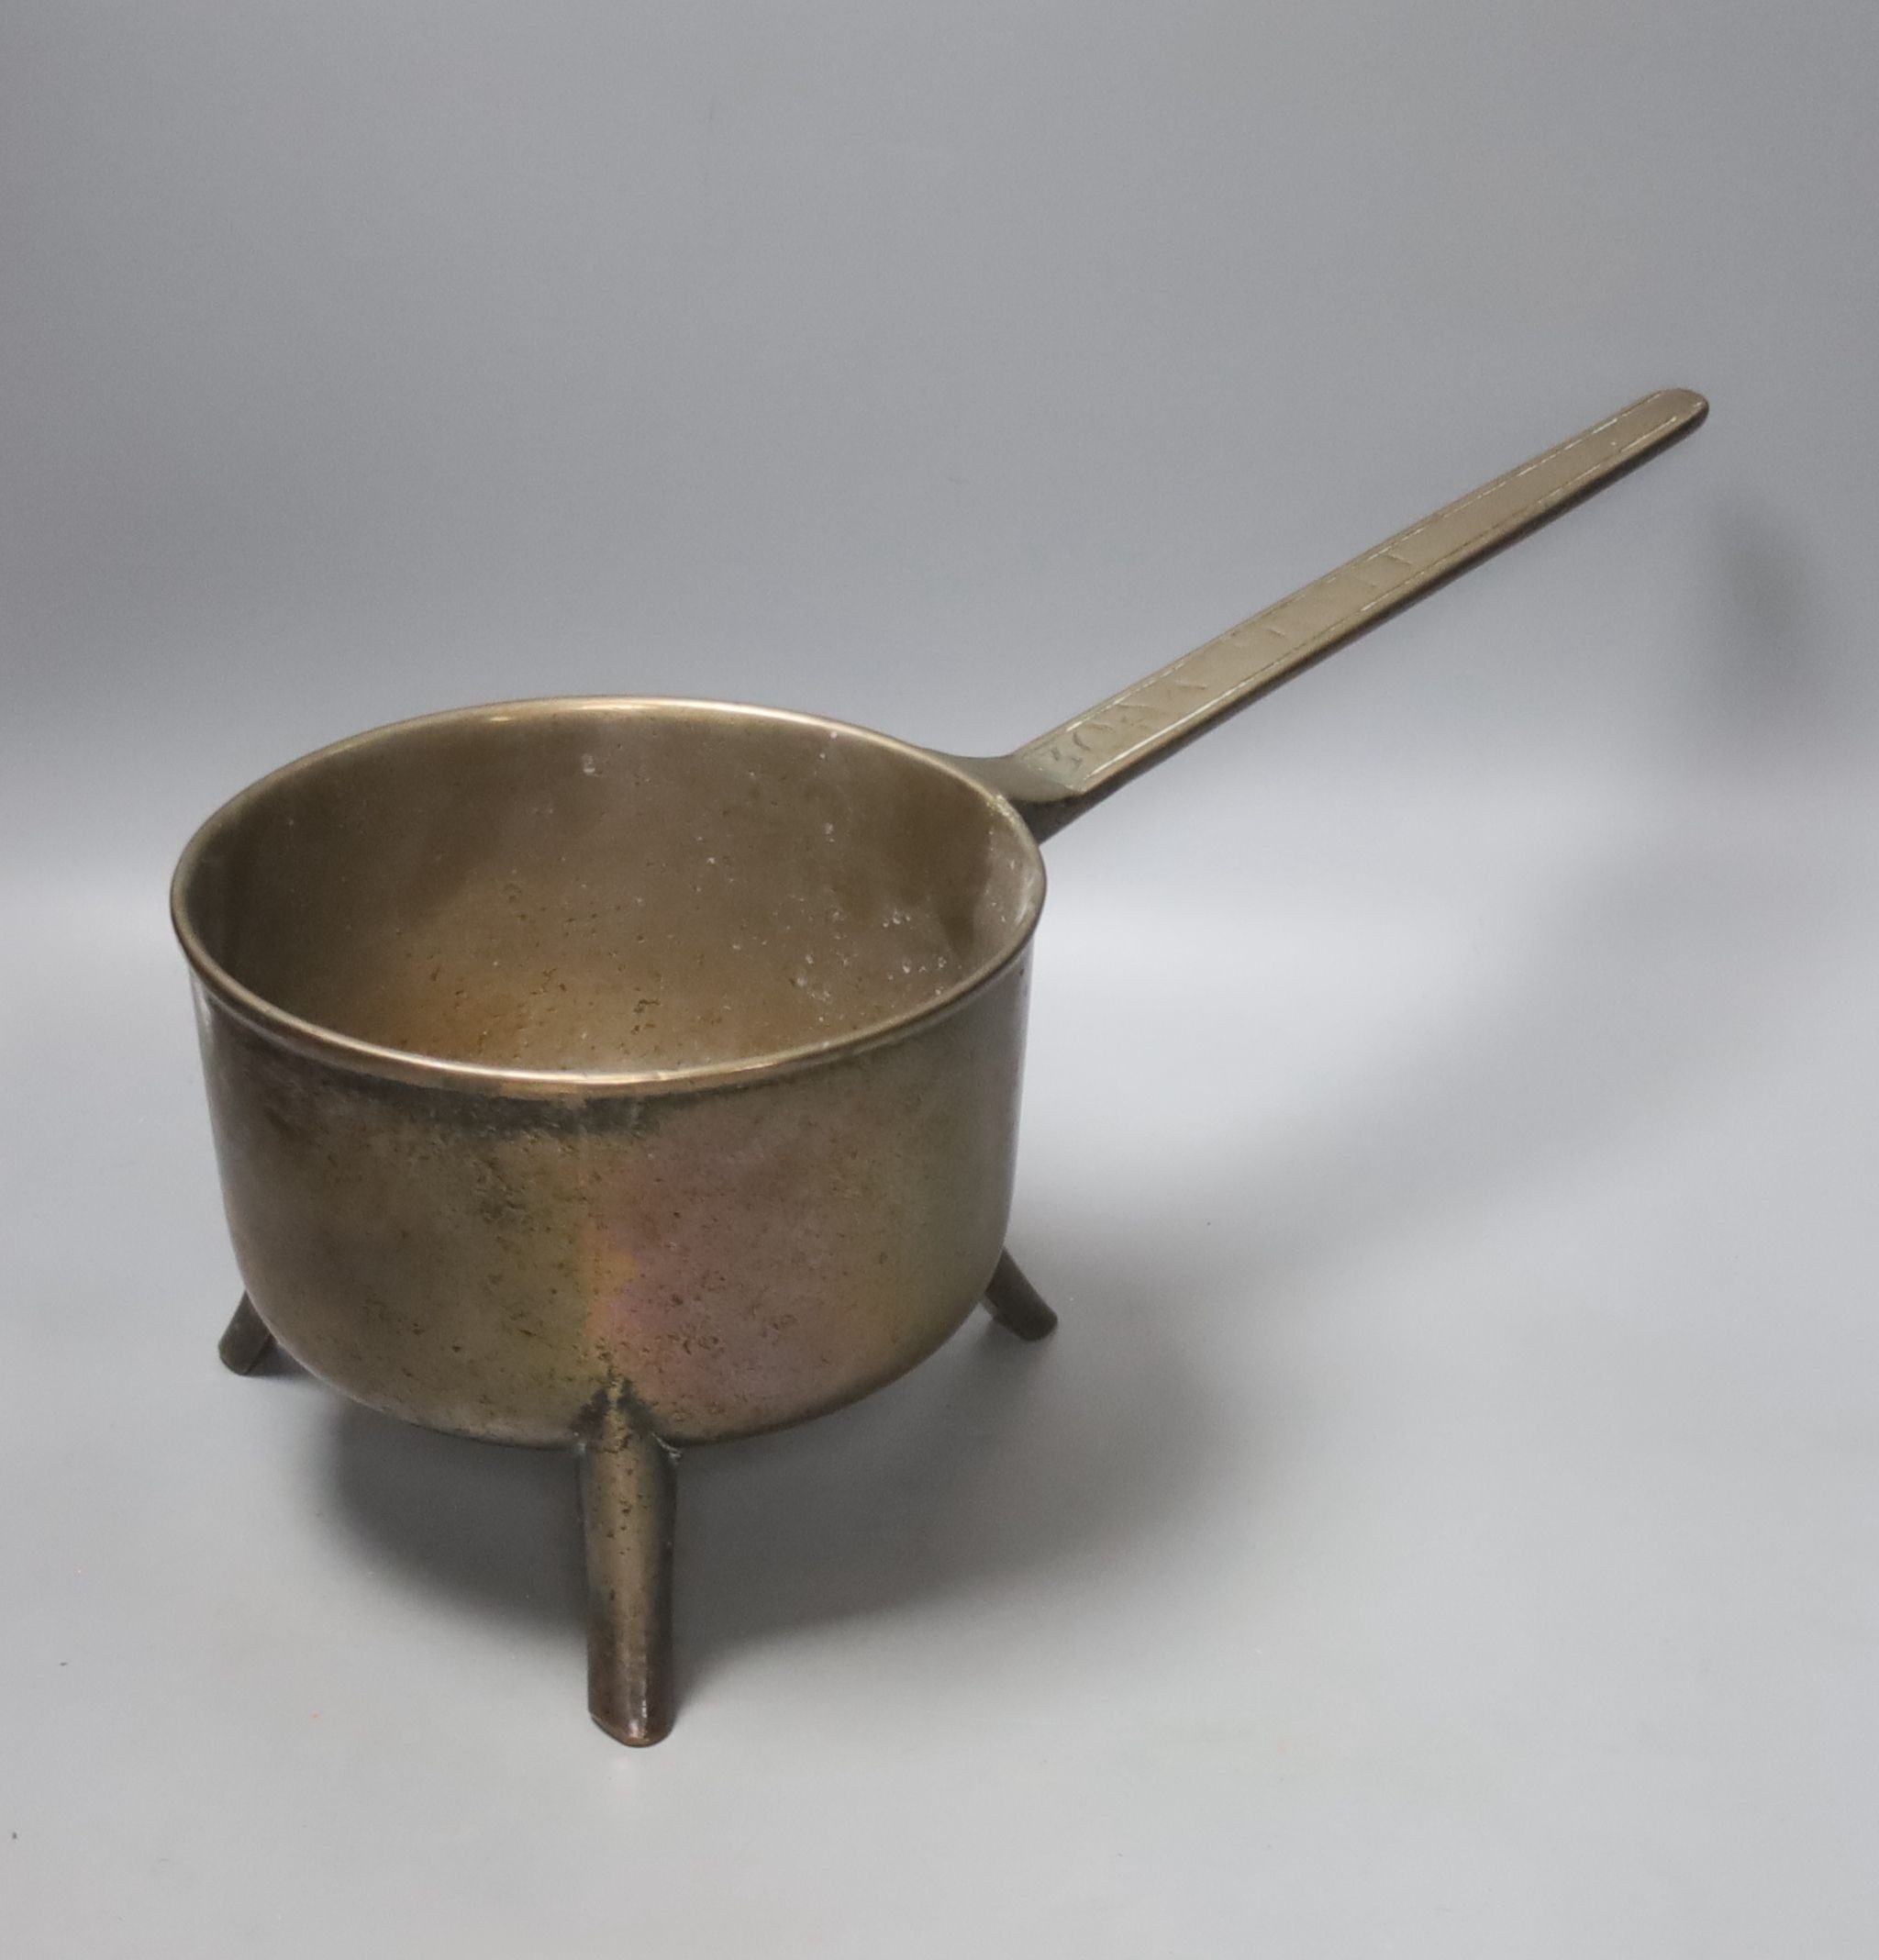 An 18th century ‘30’ bell metal skillet by Warner, by the Warner foundry, 21cm diameter